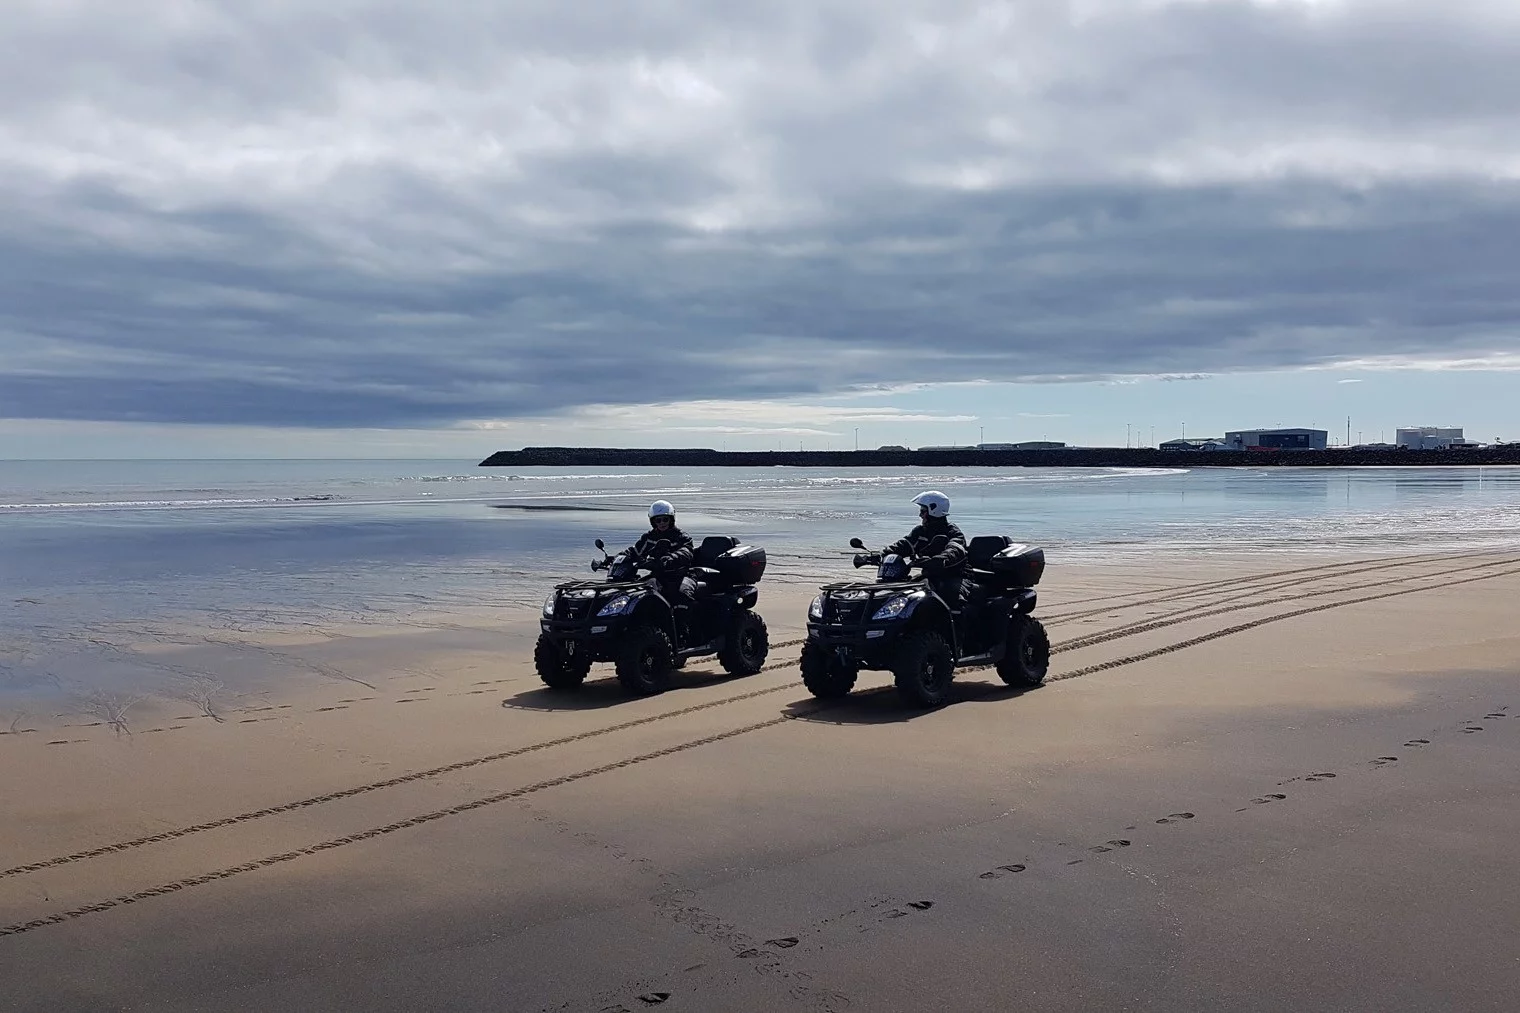 Two buggies driving on the beach